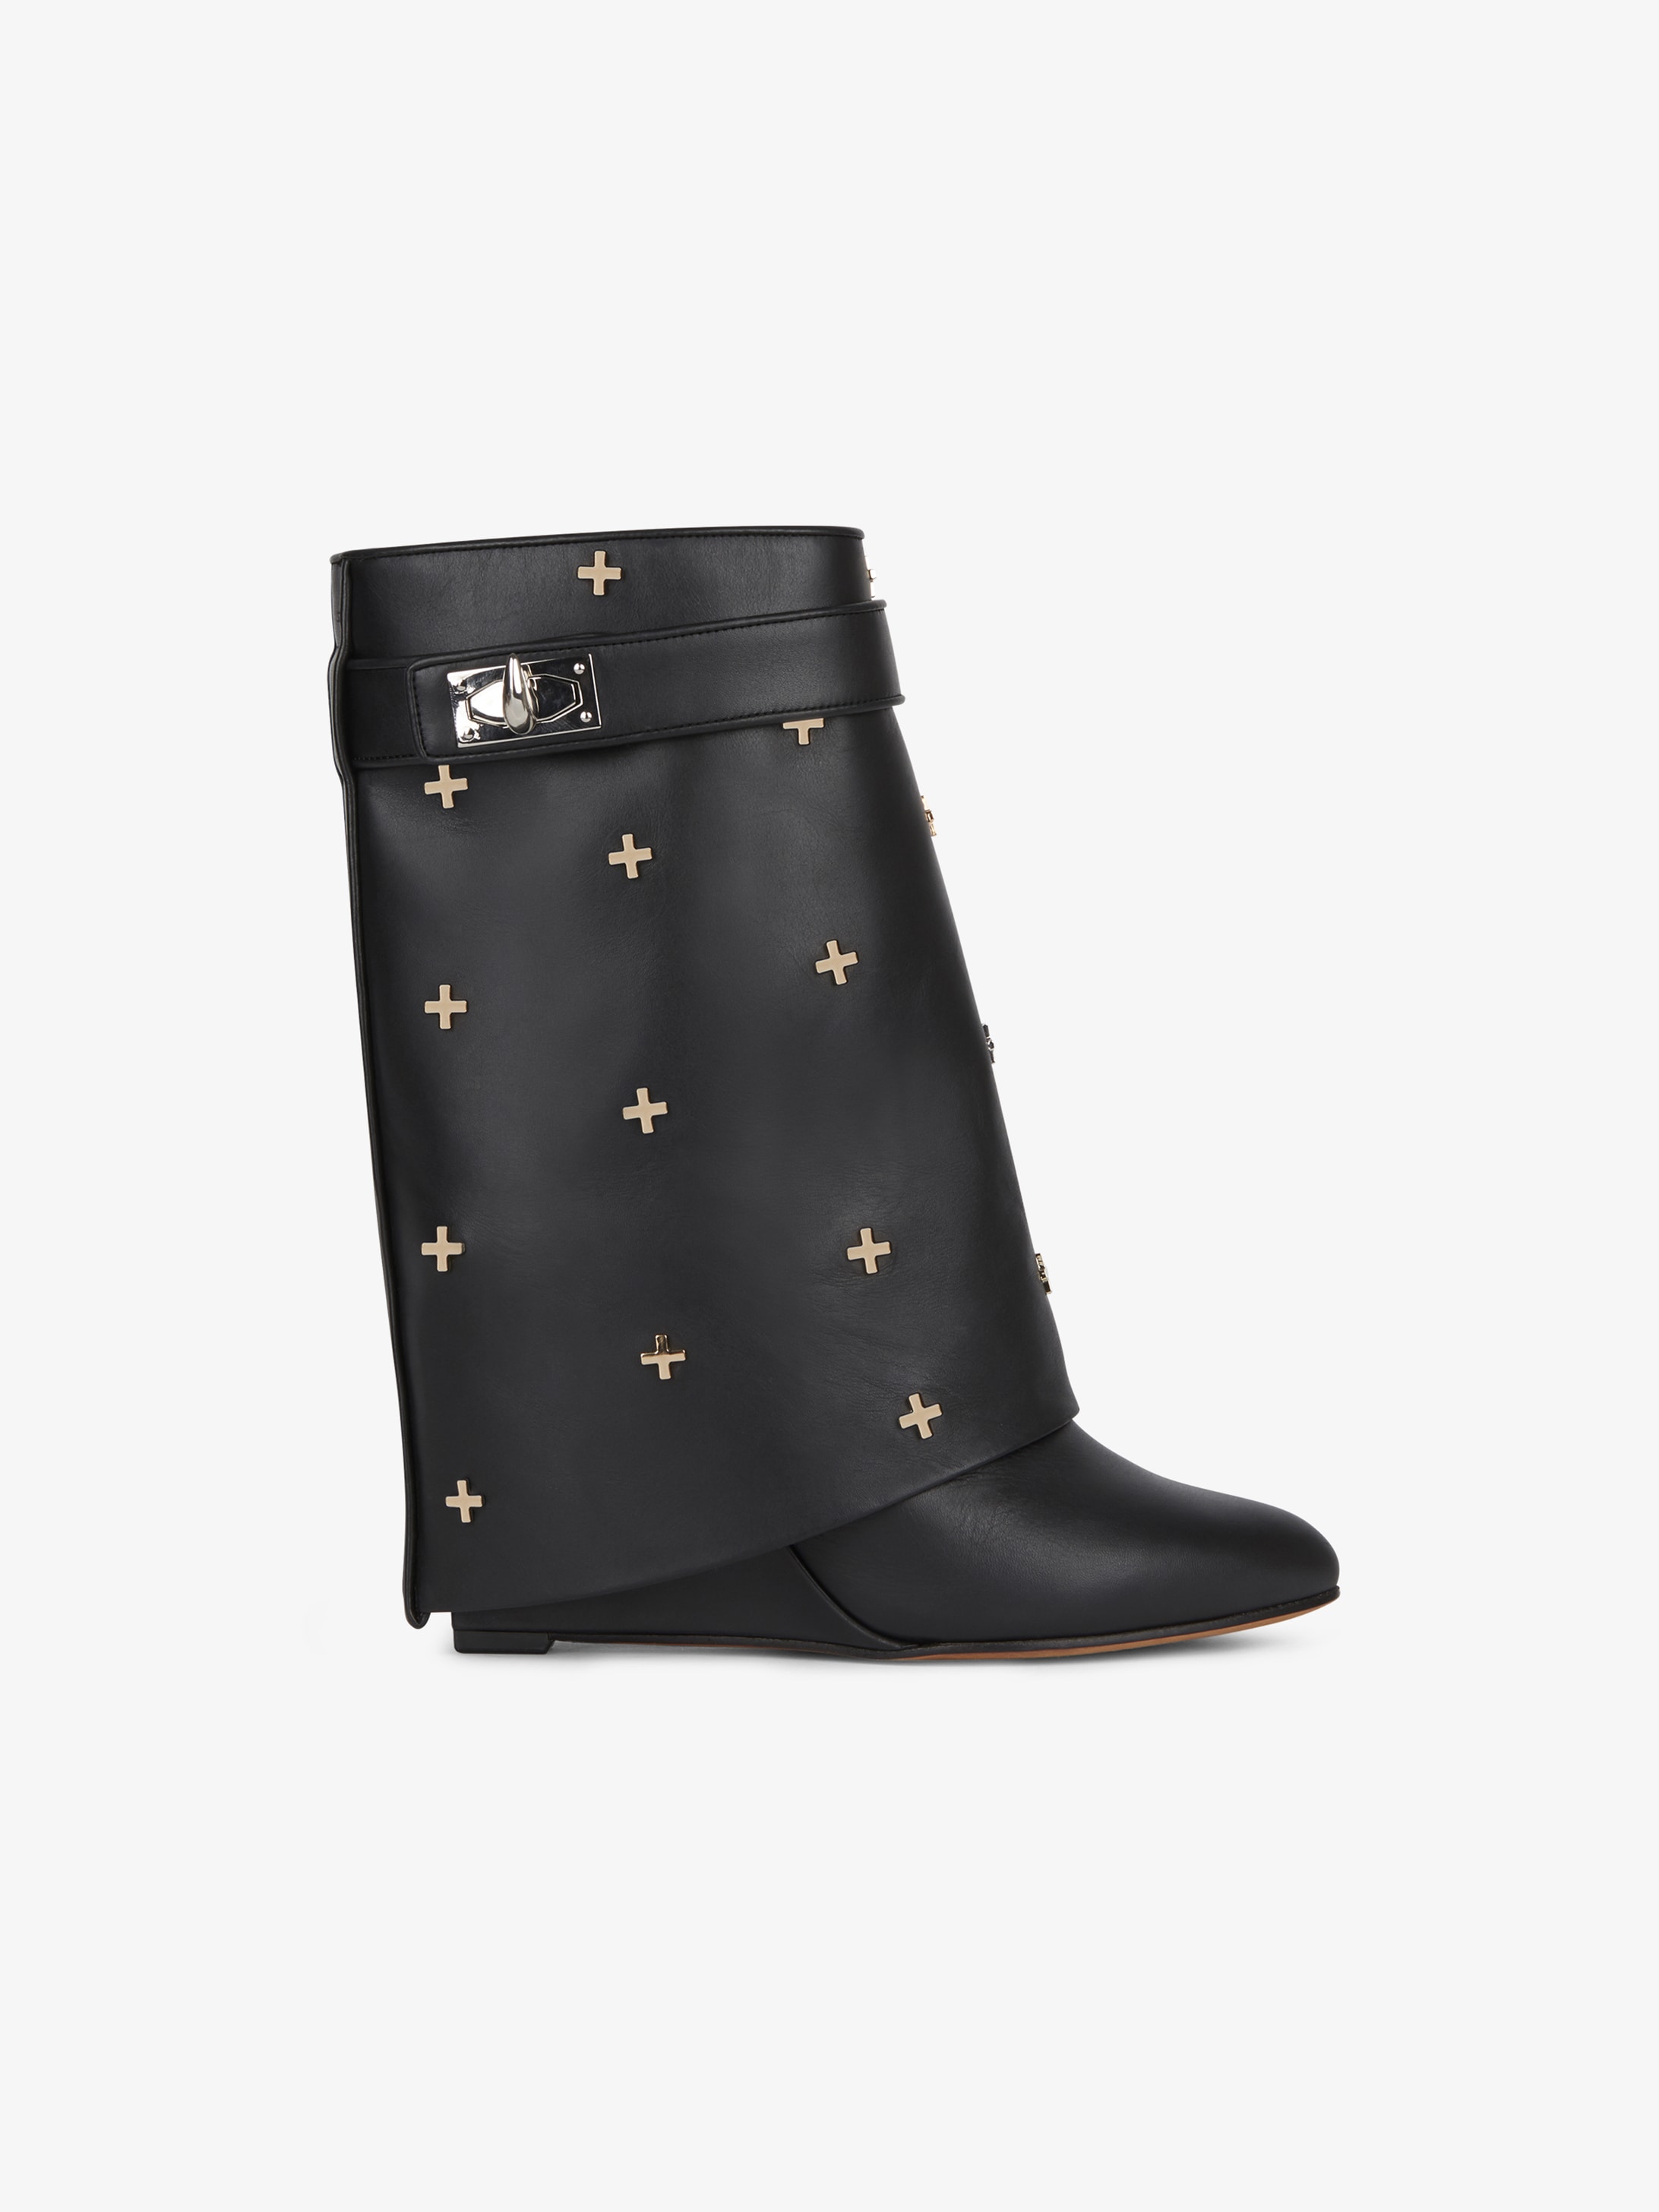 Givenchy Shark Lock ankle boots with 